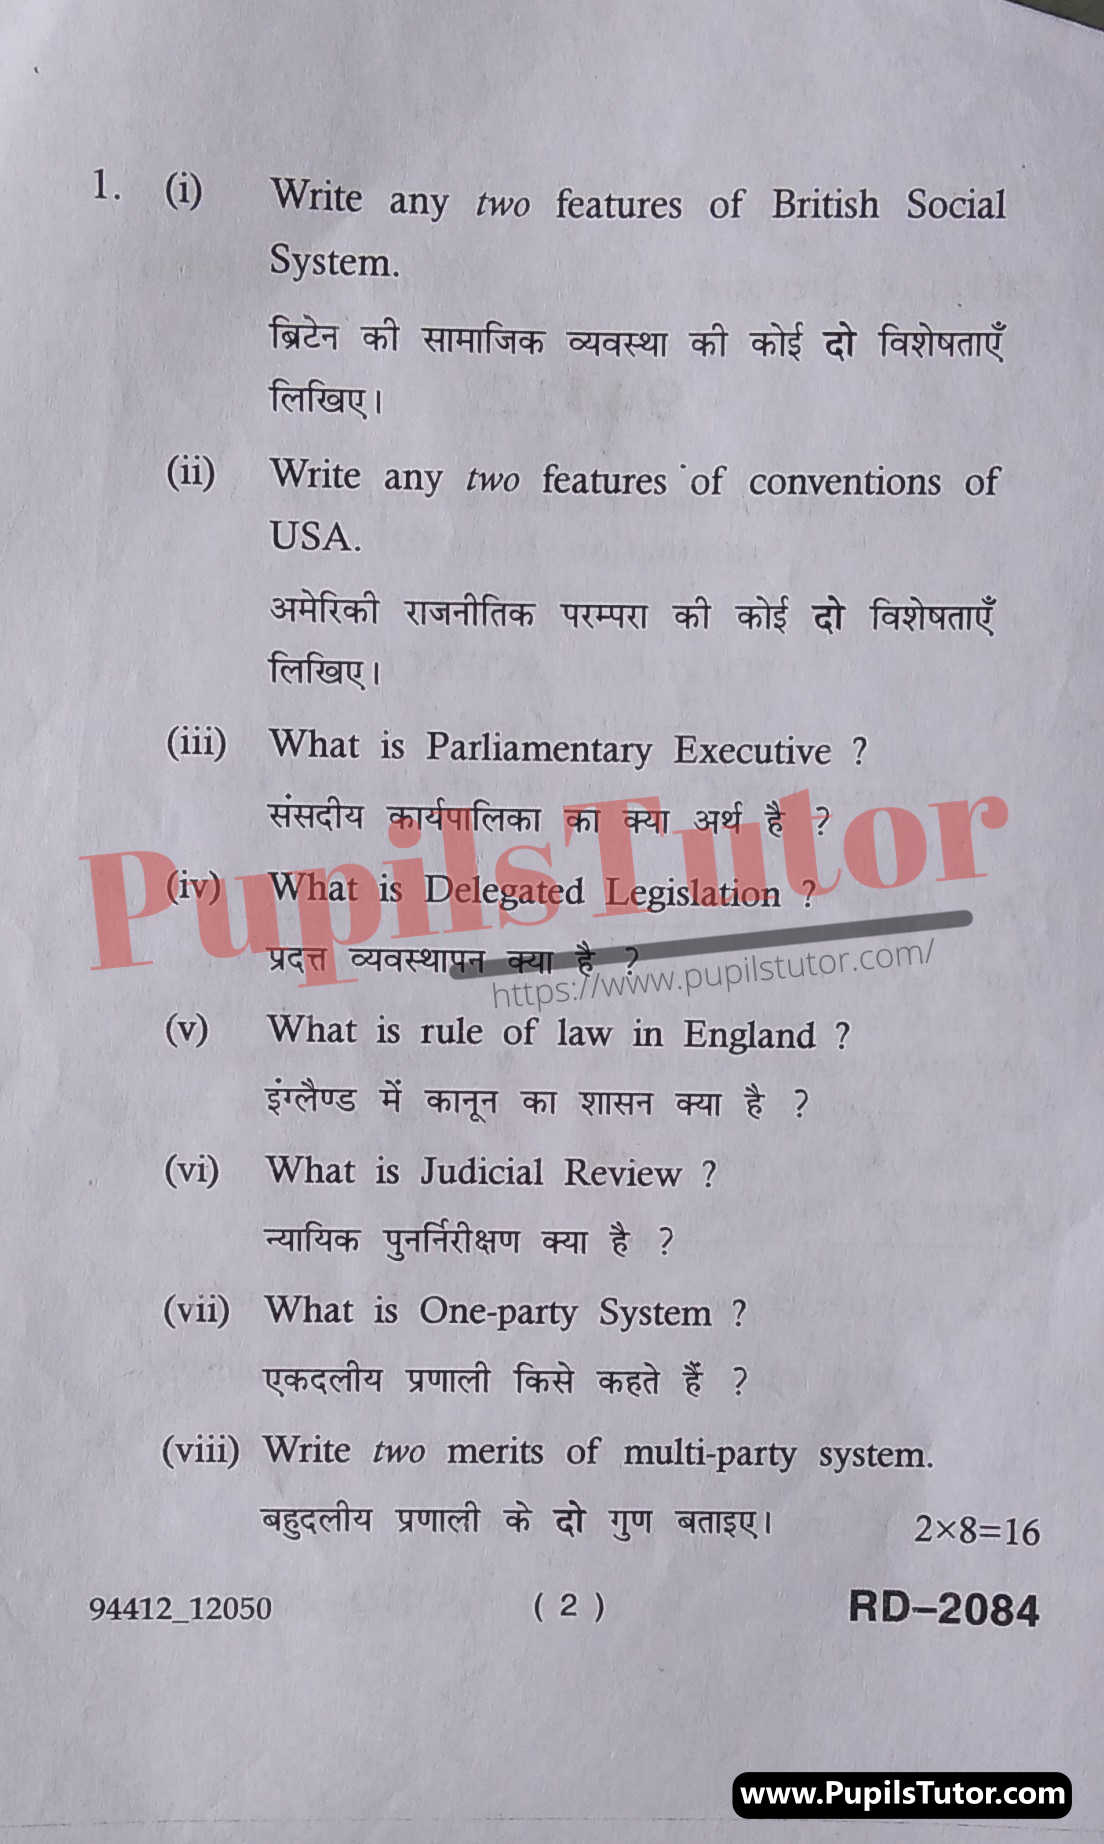 M.D. University B.A. Political Science (Comparative Constitution Of UK And USA) Sixth Semester Important Question Answer And Solution - www.pupilstutor.com (Paper Page Number 2)